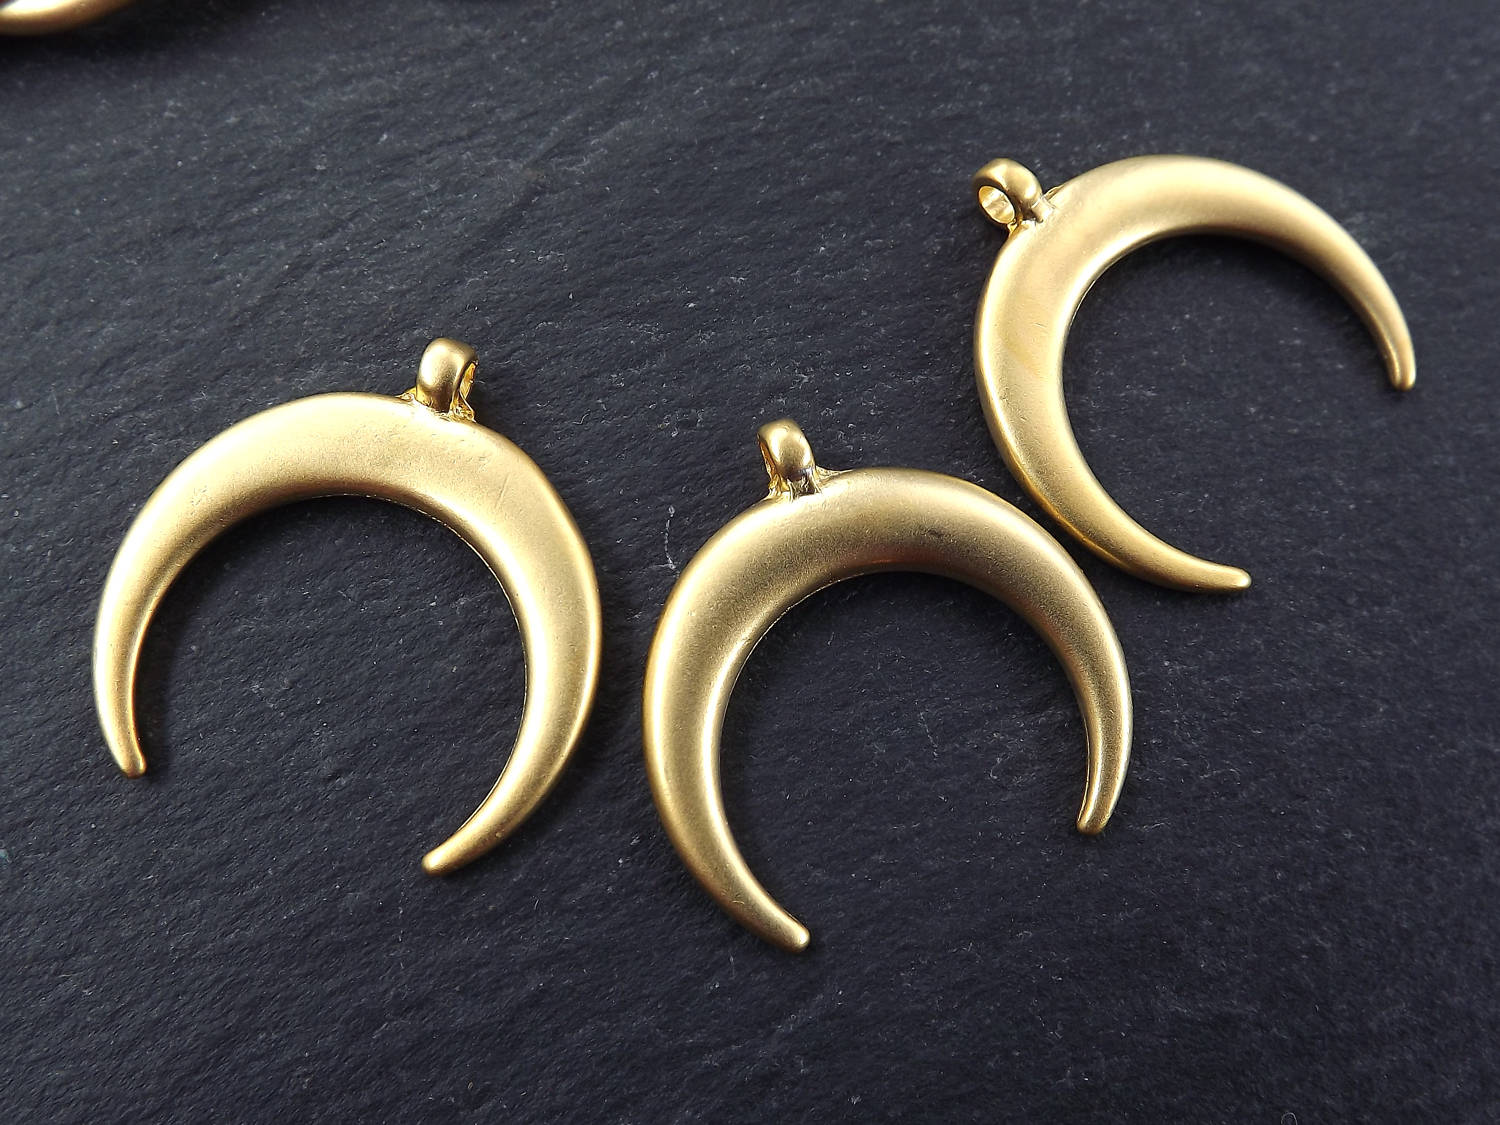 Crescent Double Horn Pendant Charms, Tribal Charm, Moon Charms, 22k Matte Gold Plated 3pc